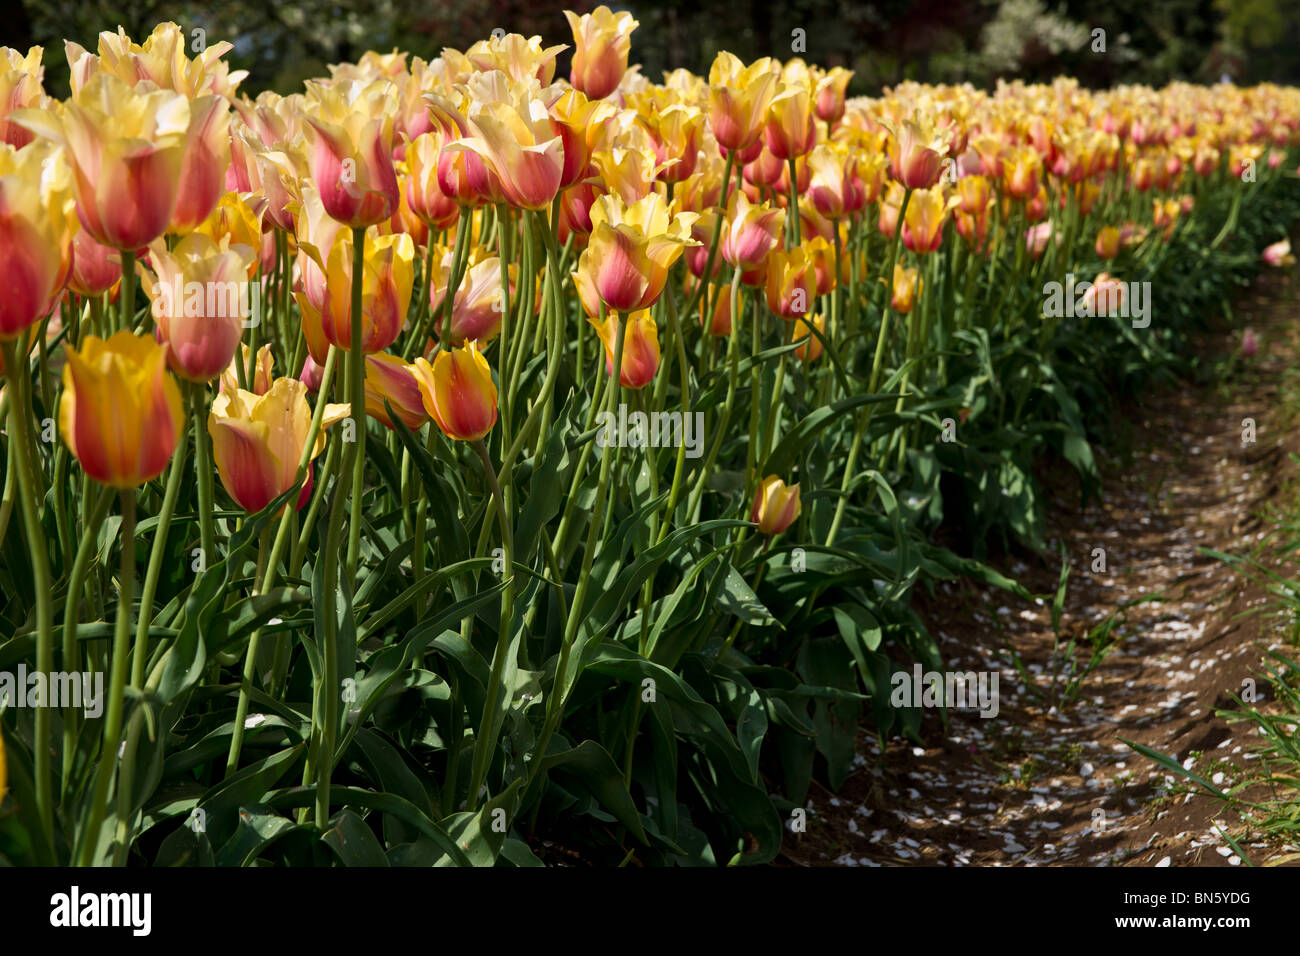 Blushing Beauty Tulip High Resolution Stock Photography And Images Alamy